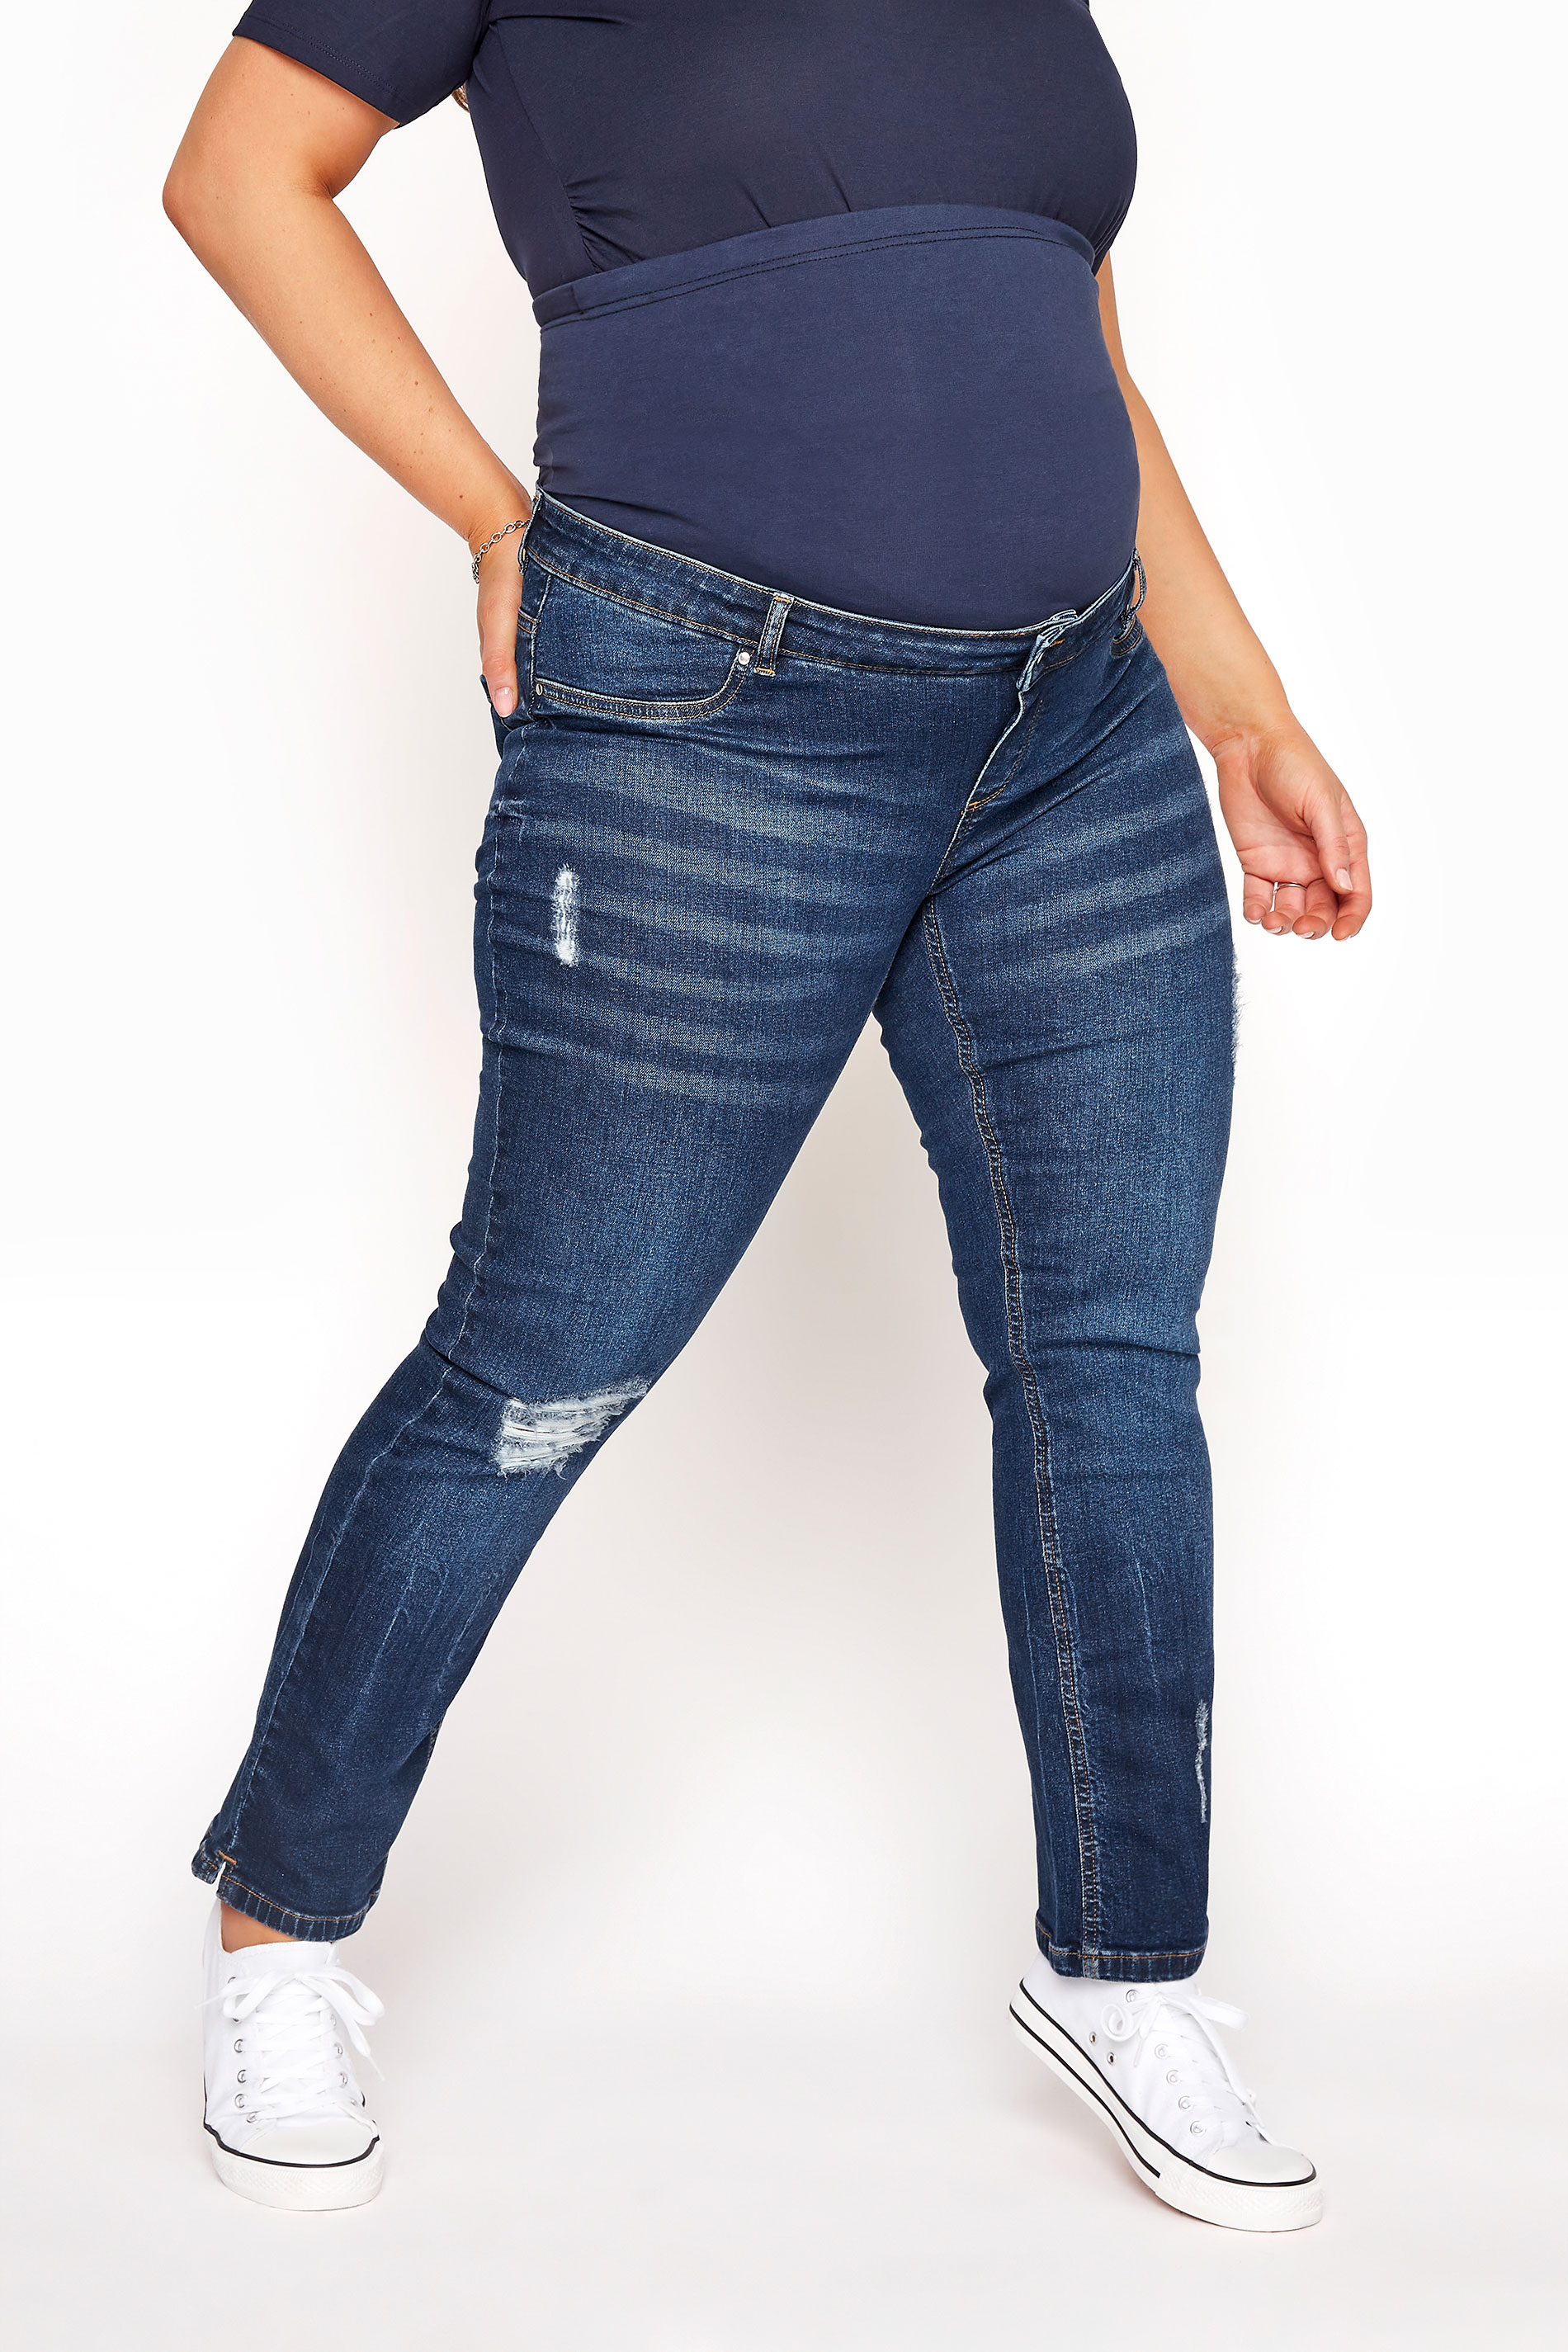 BUMP IT UP MATERNITY Blue Distressed Straight Leg Jeans With Comfort Panel